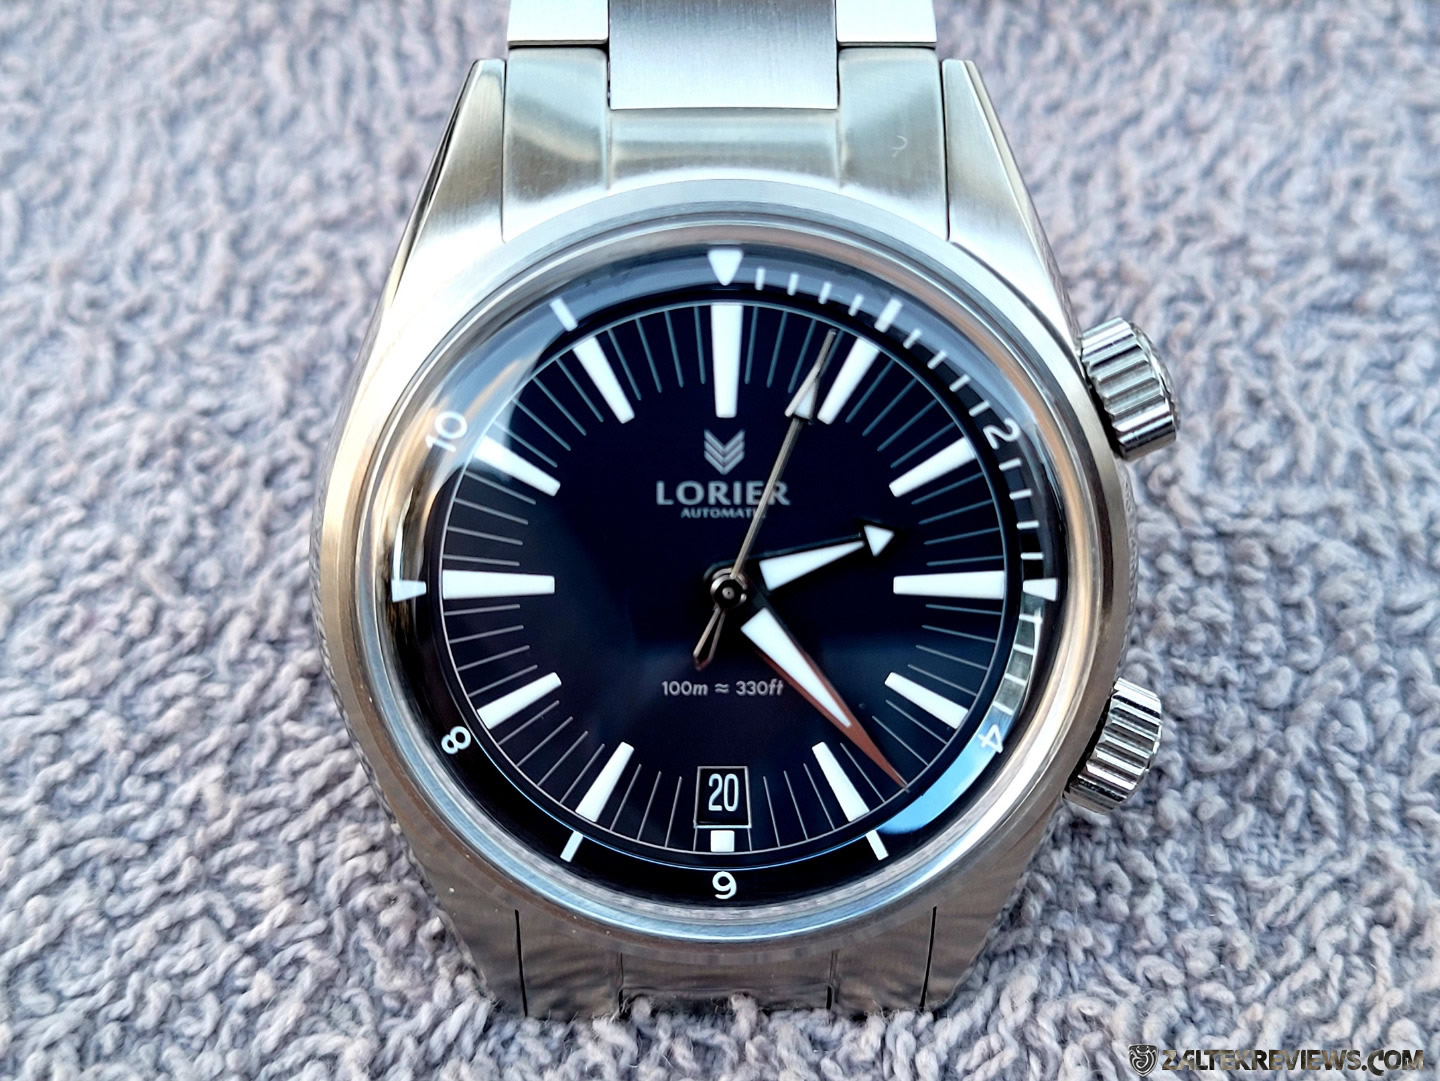 Reviewing The Lorier Hydra II Dive Watch